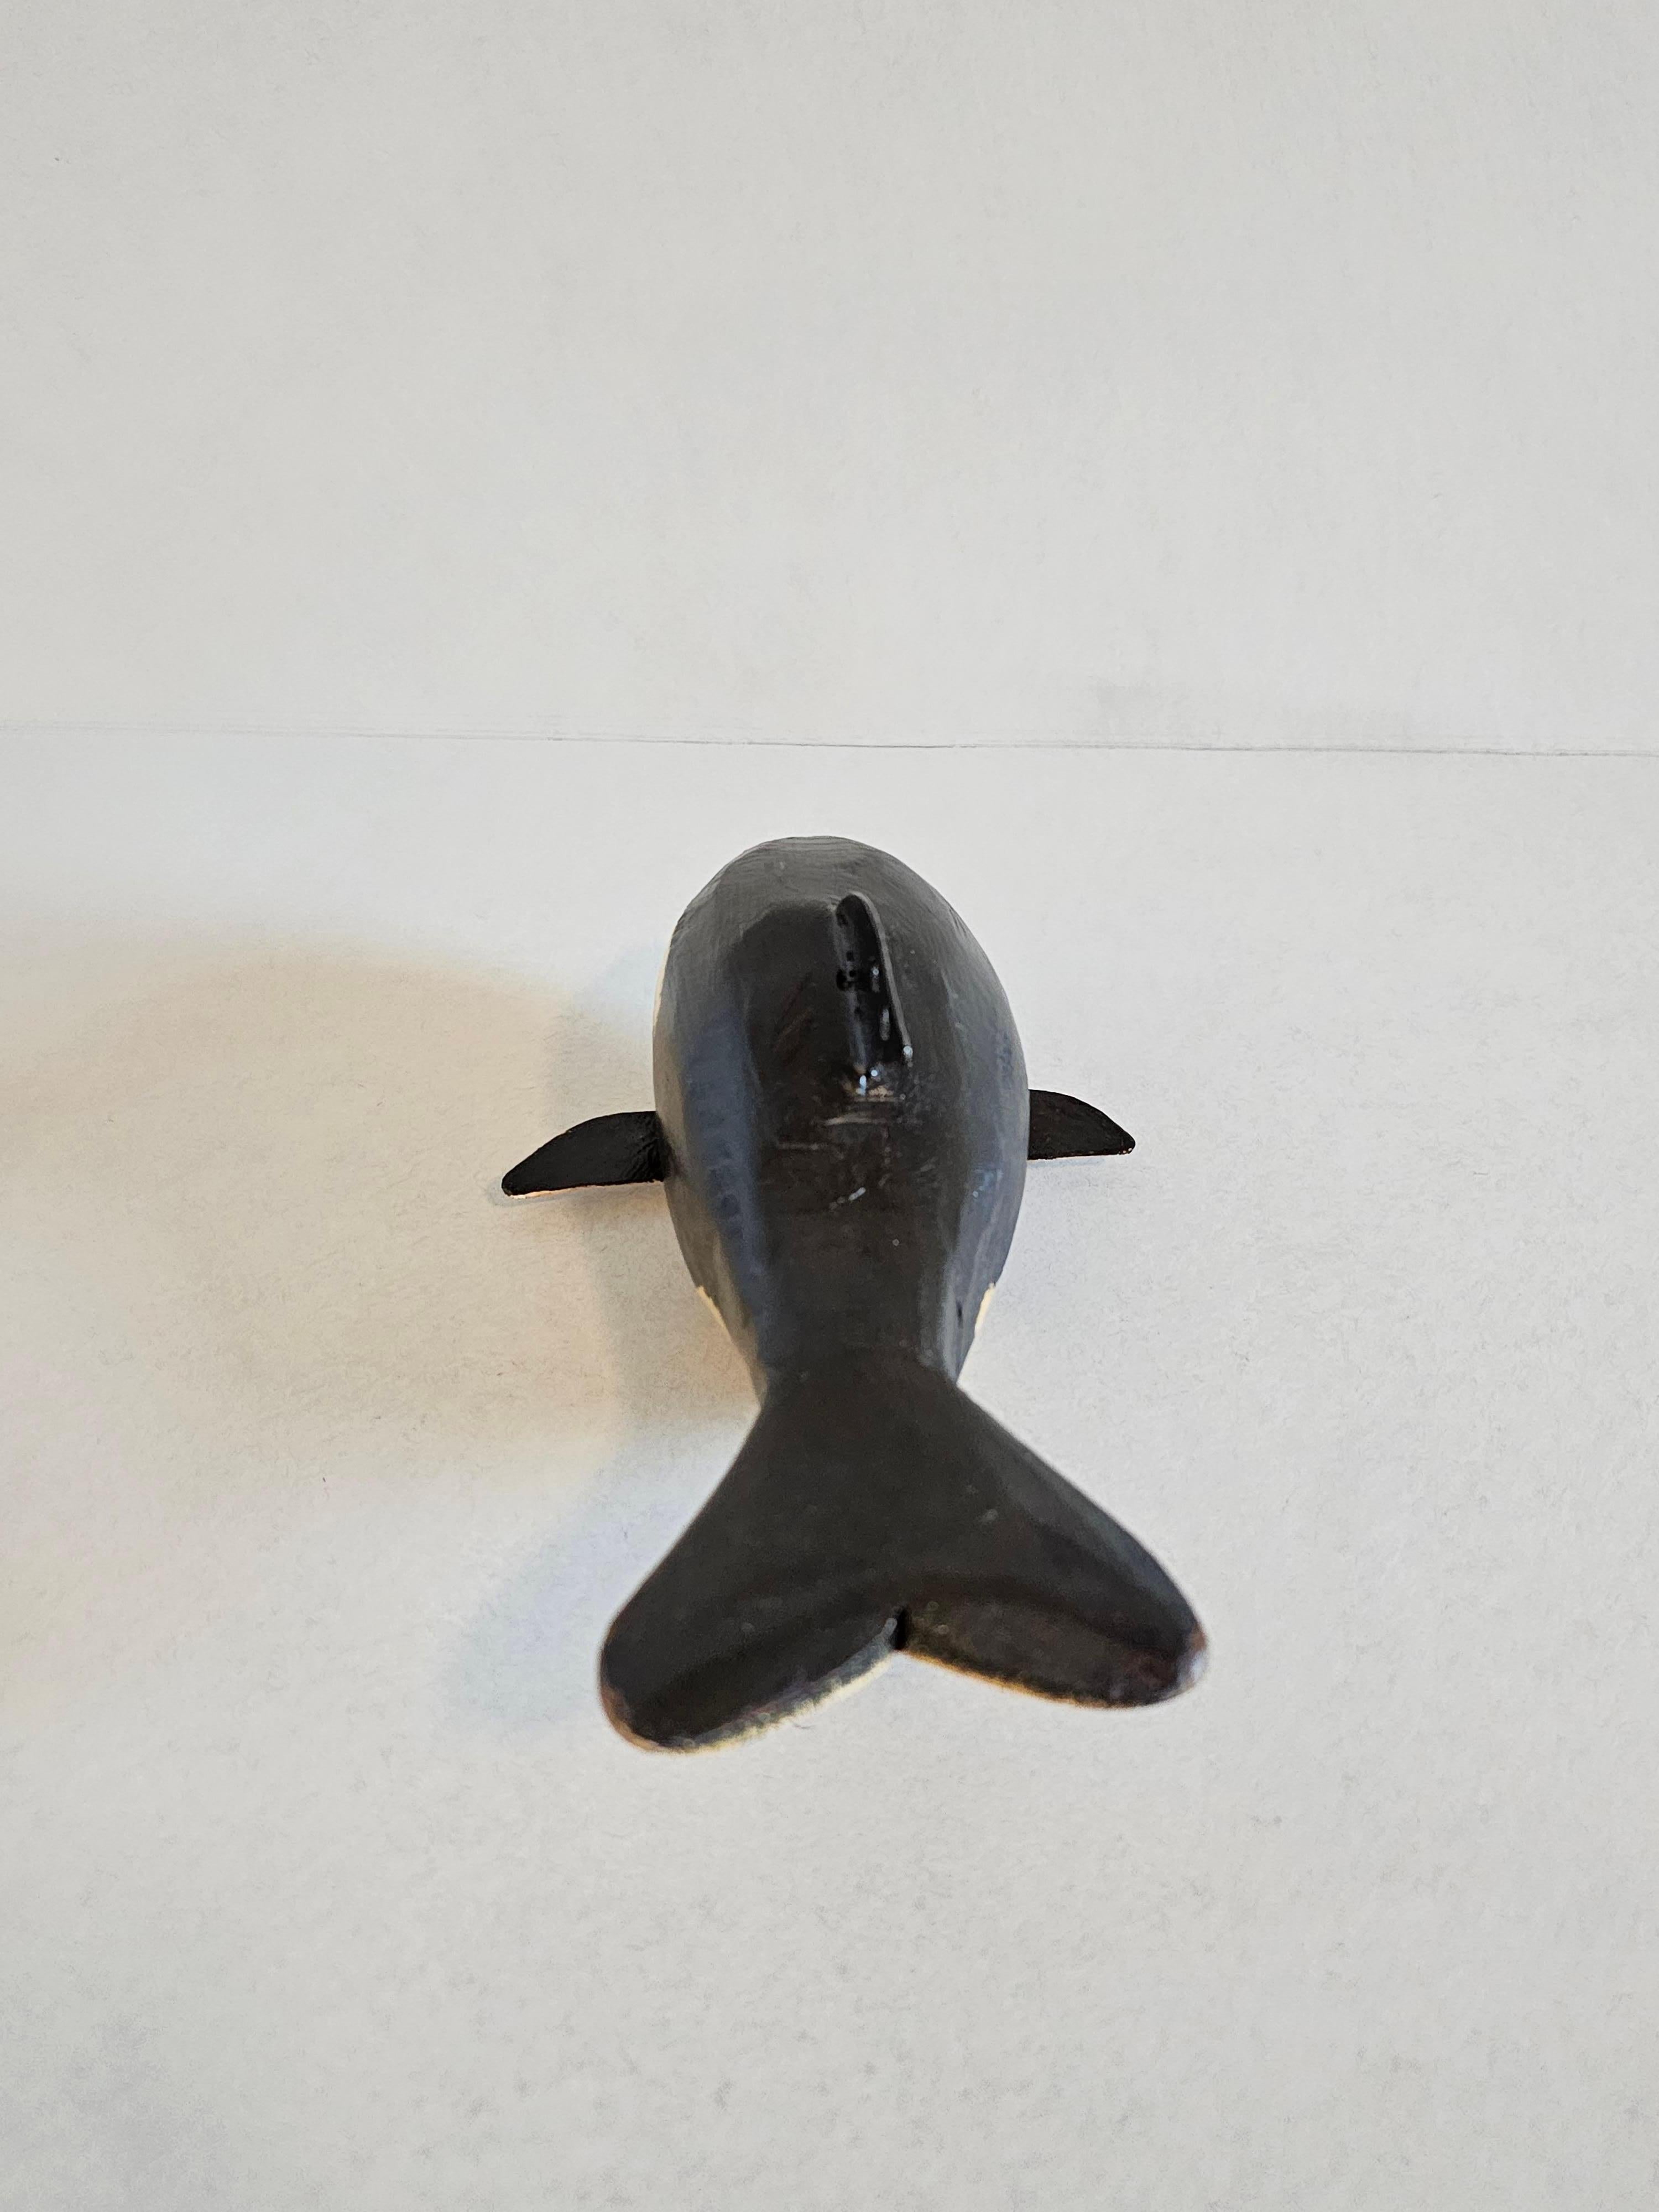 Duluth Fish Decoy American Folk Art Carved Painted Orca Killer Whale Sculpture For Sale 7